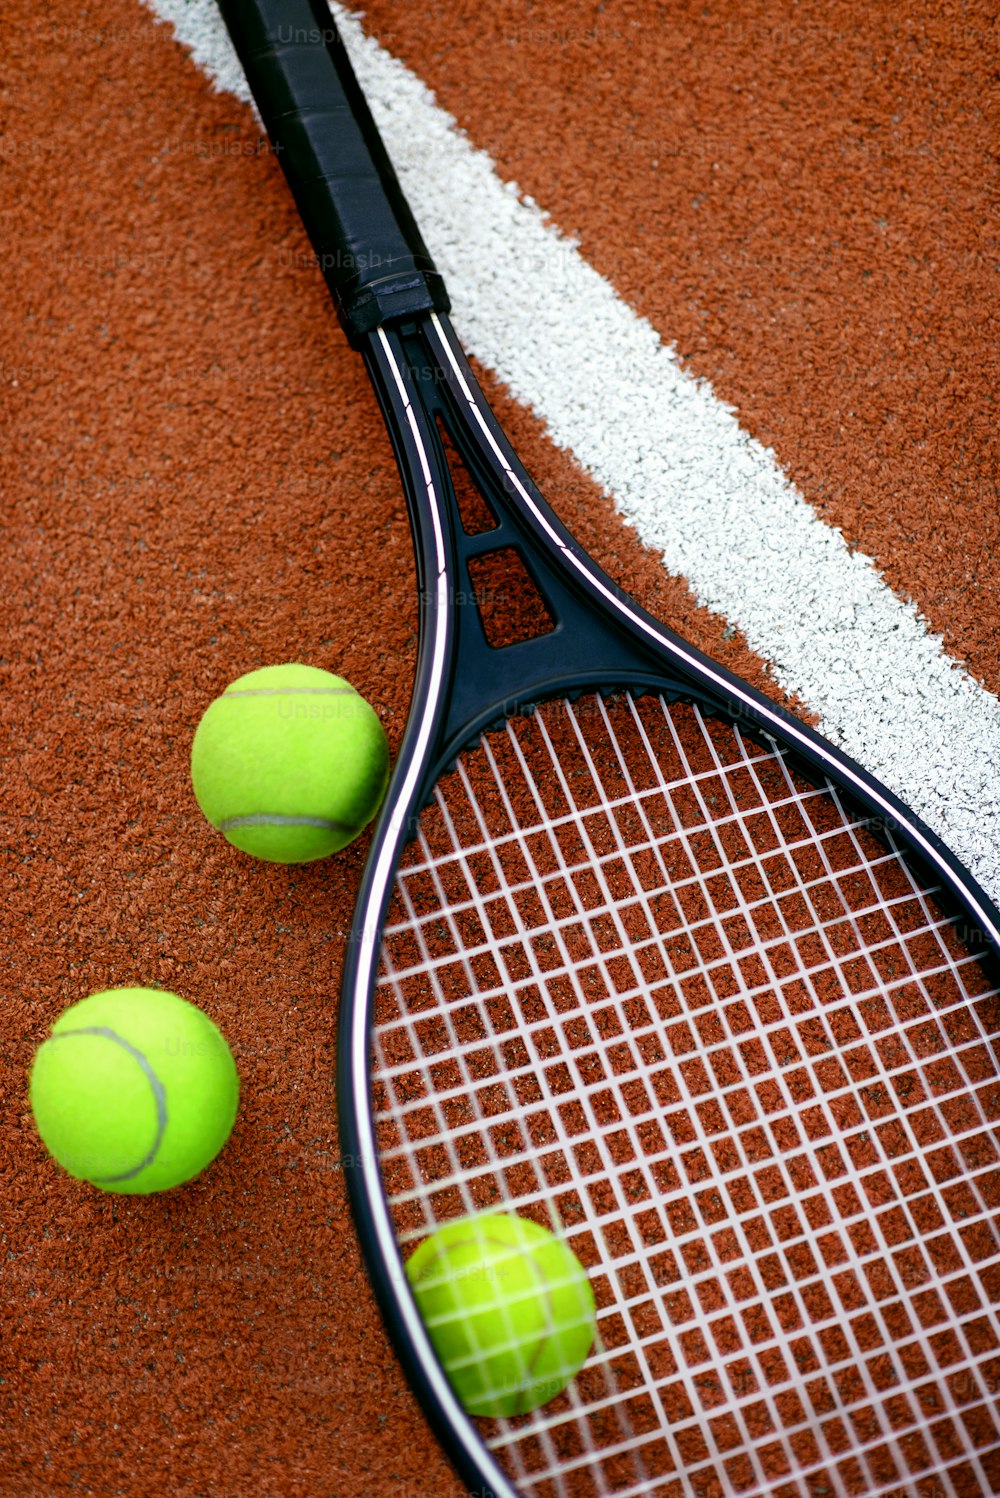 Sport. Tennis Balls And Racket On Court. Close Up Of Equipment For Sports Such As Tennis Racquet And Yellow Ball Lying On Open Court. High Quality